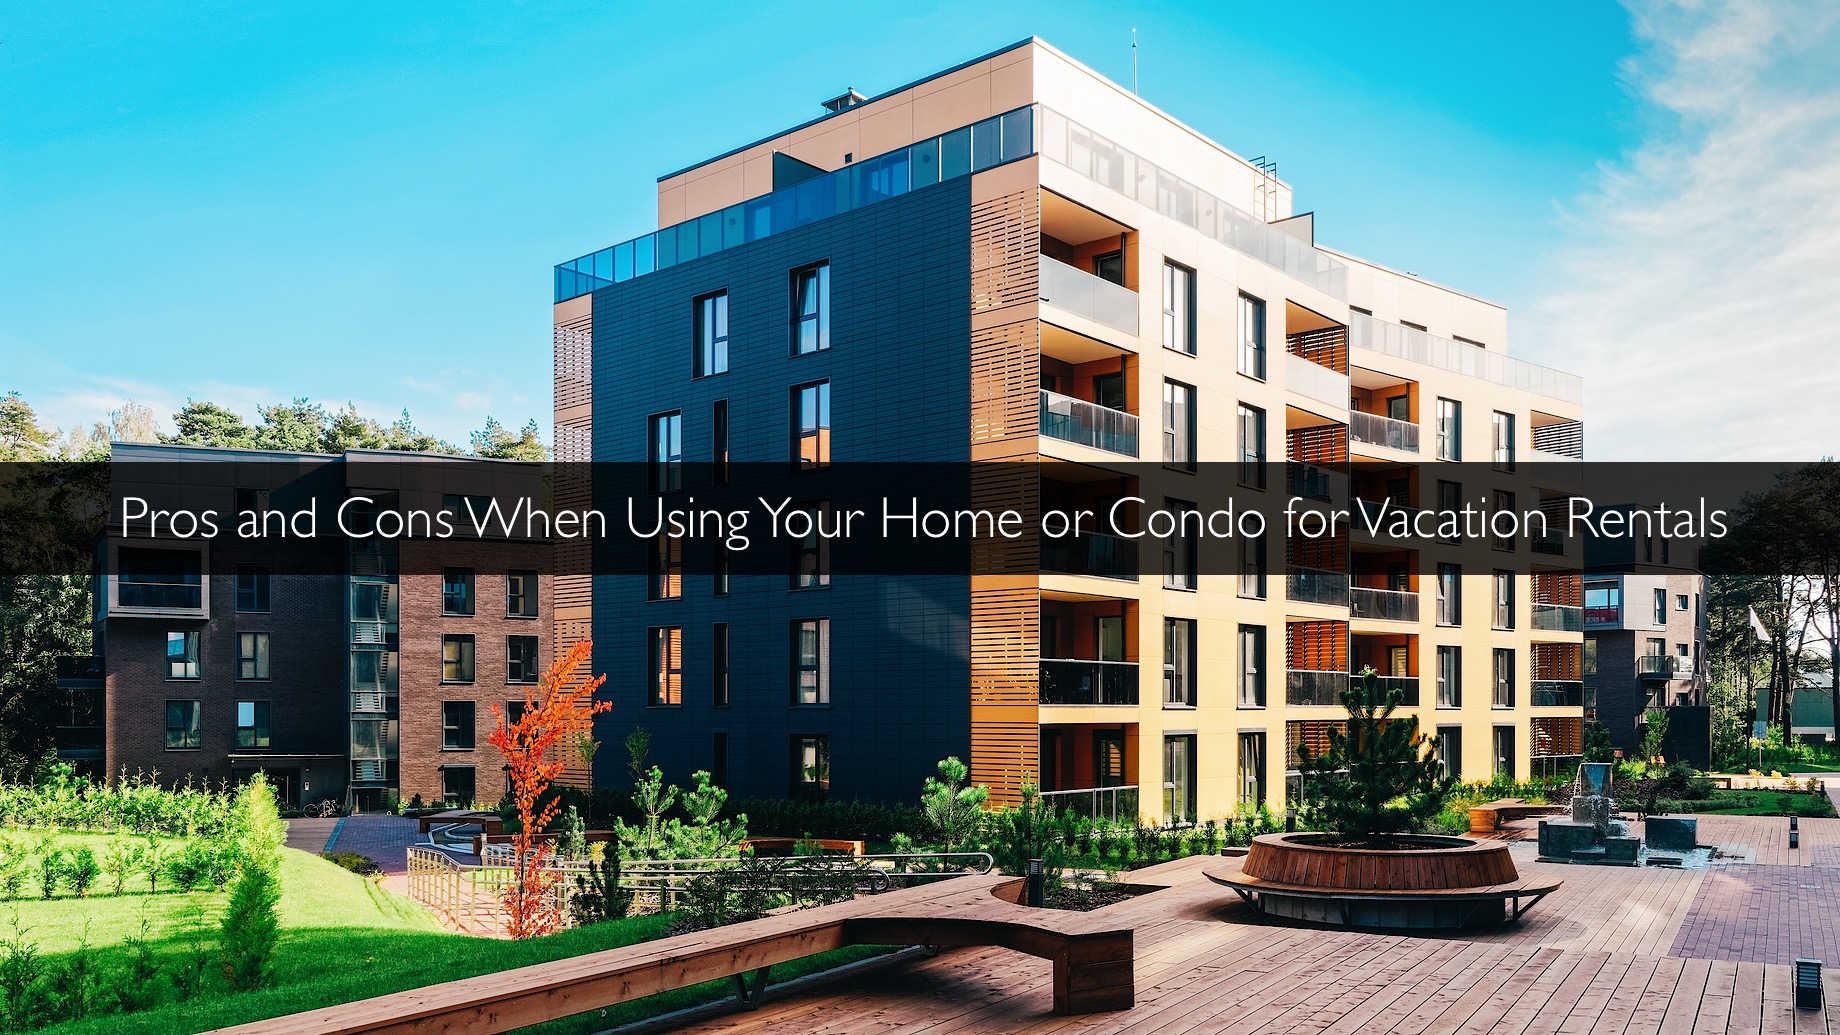 Pros and Cons When Using Your Home or Condo for Vacation Rentals